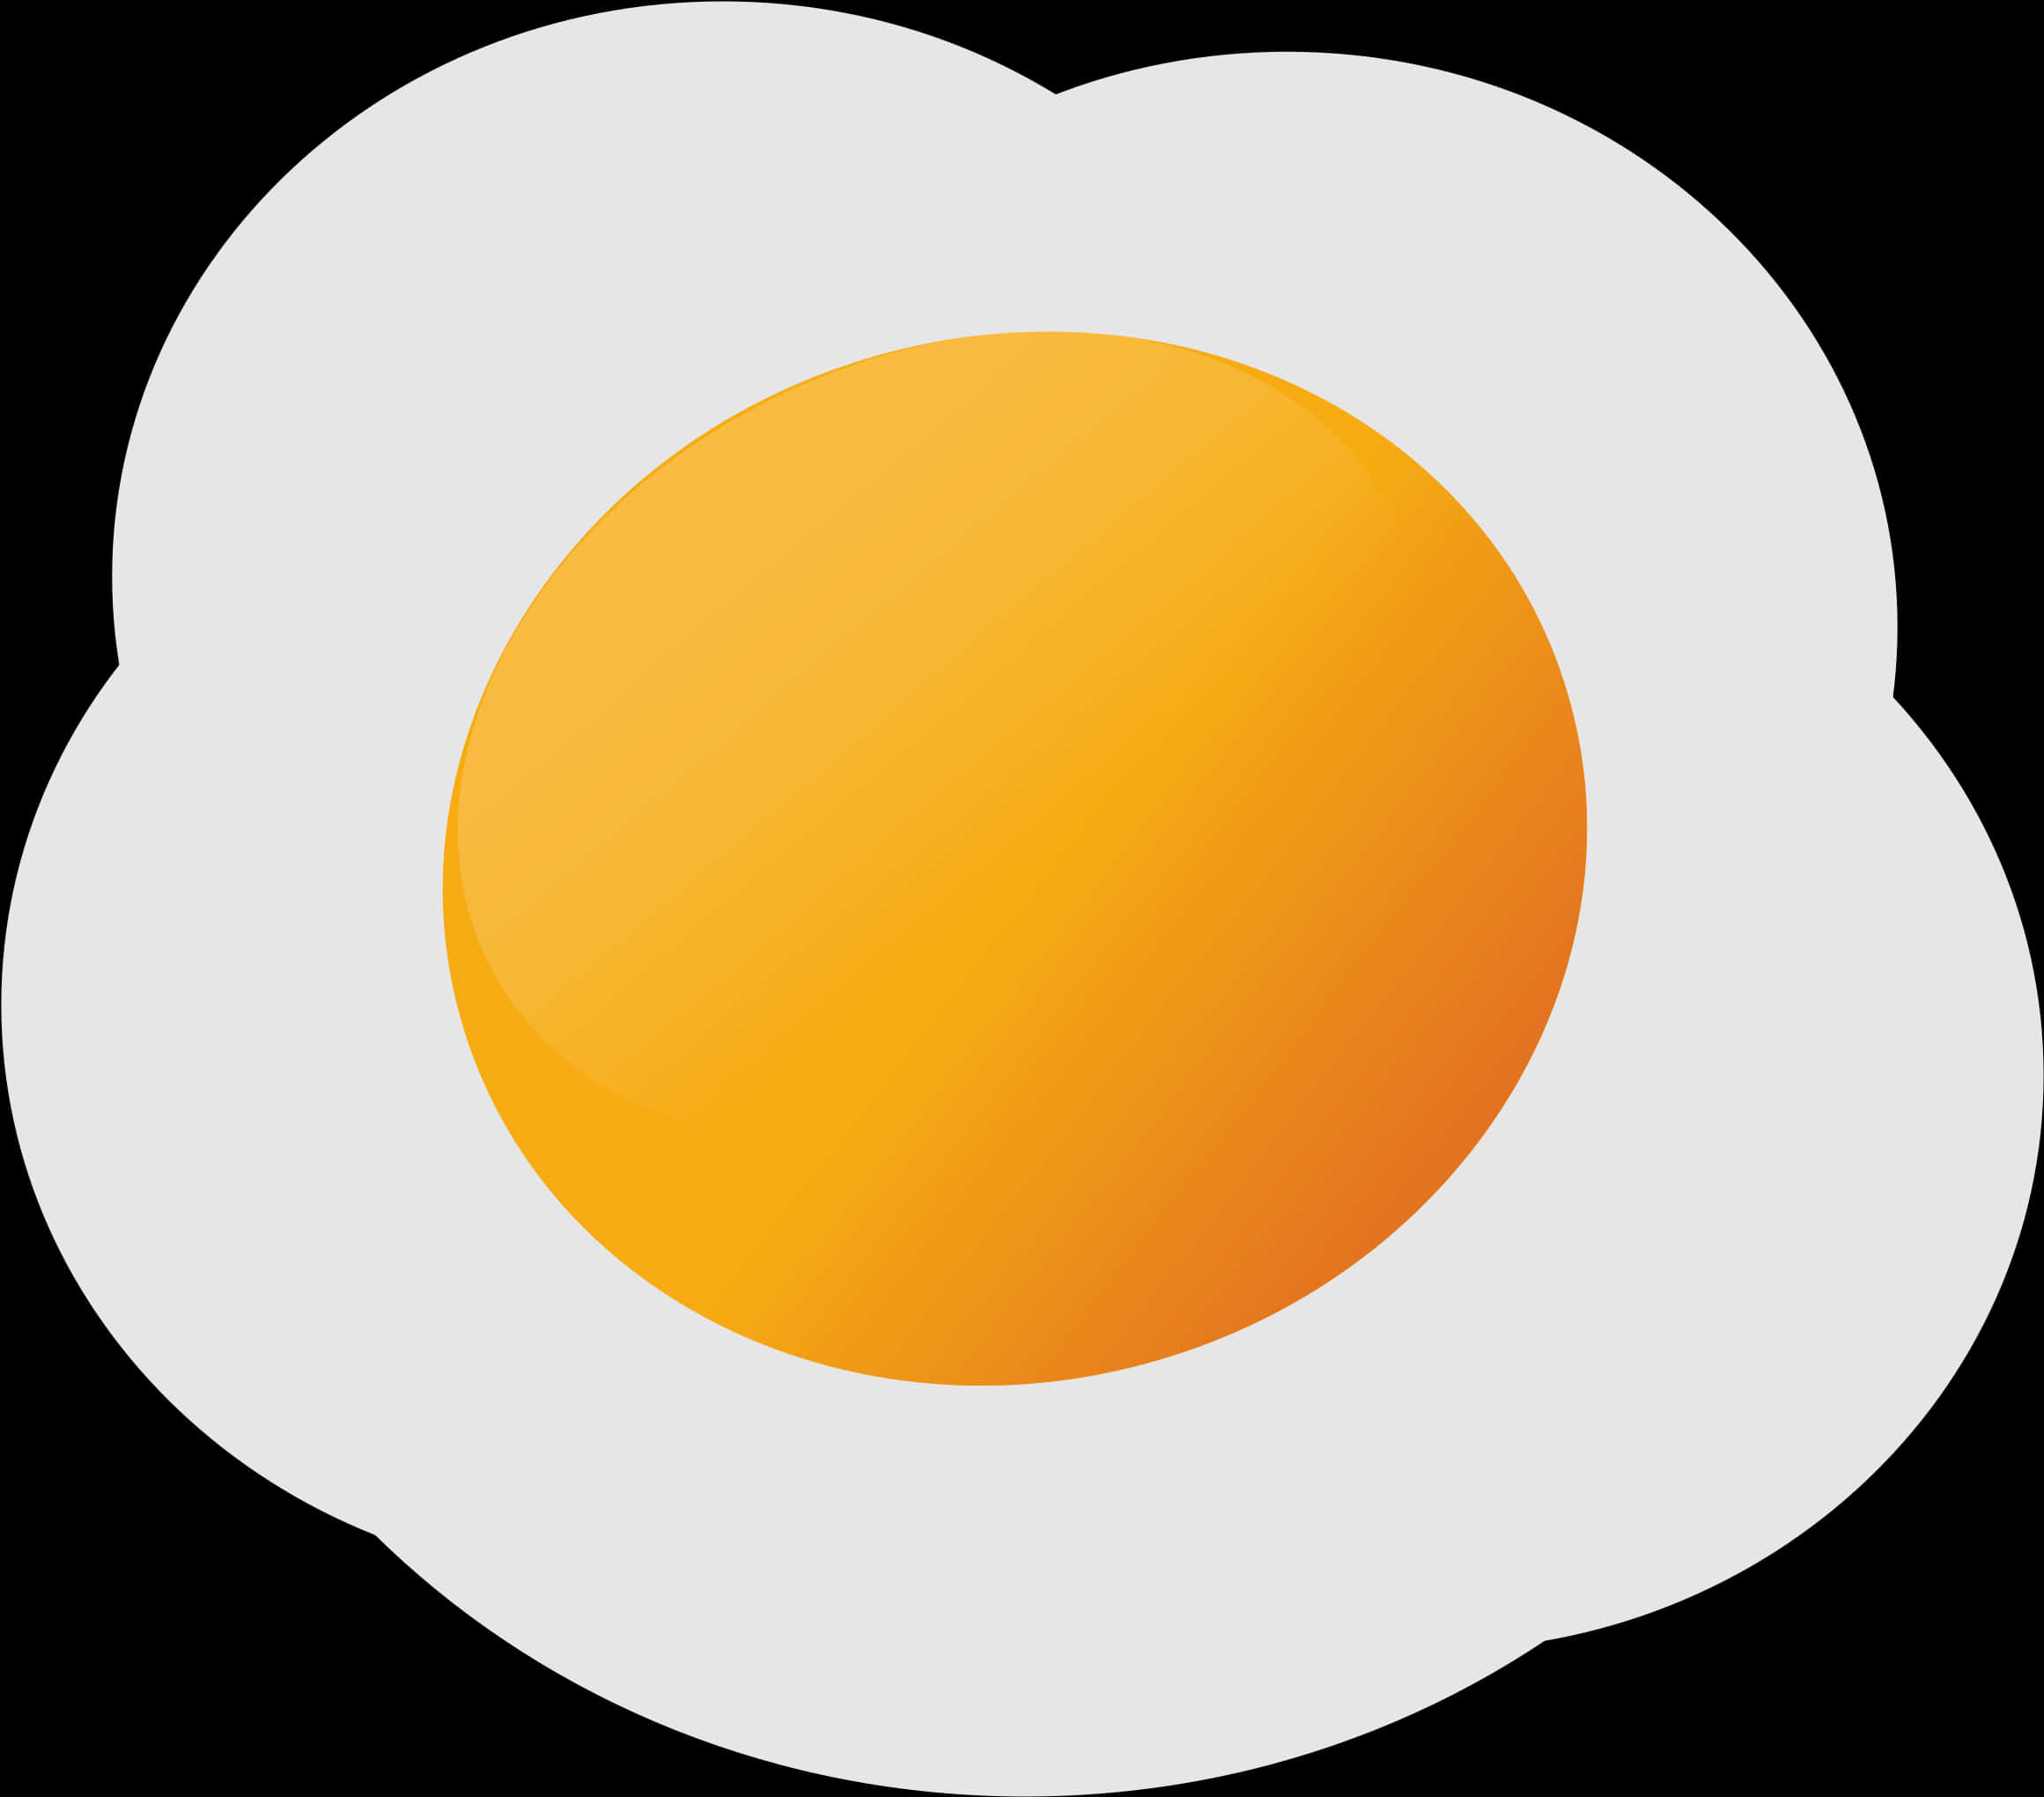 A Fried Egg With A Yellow Circle